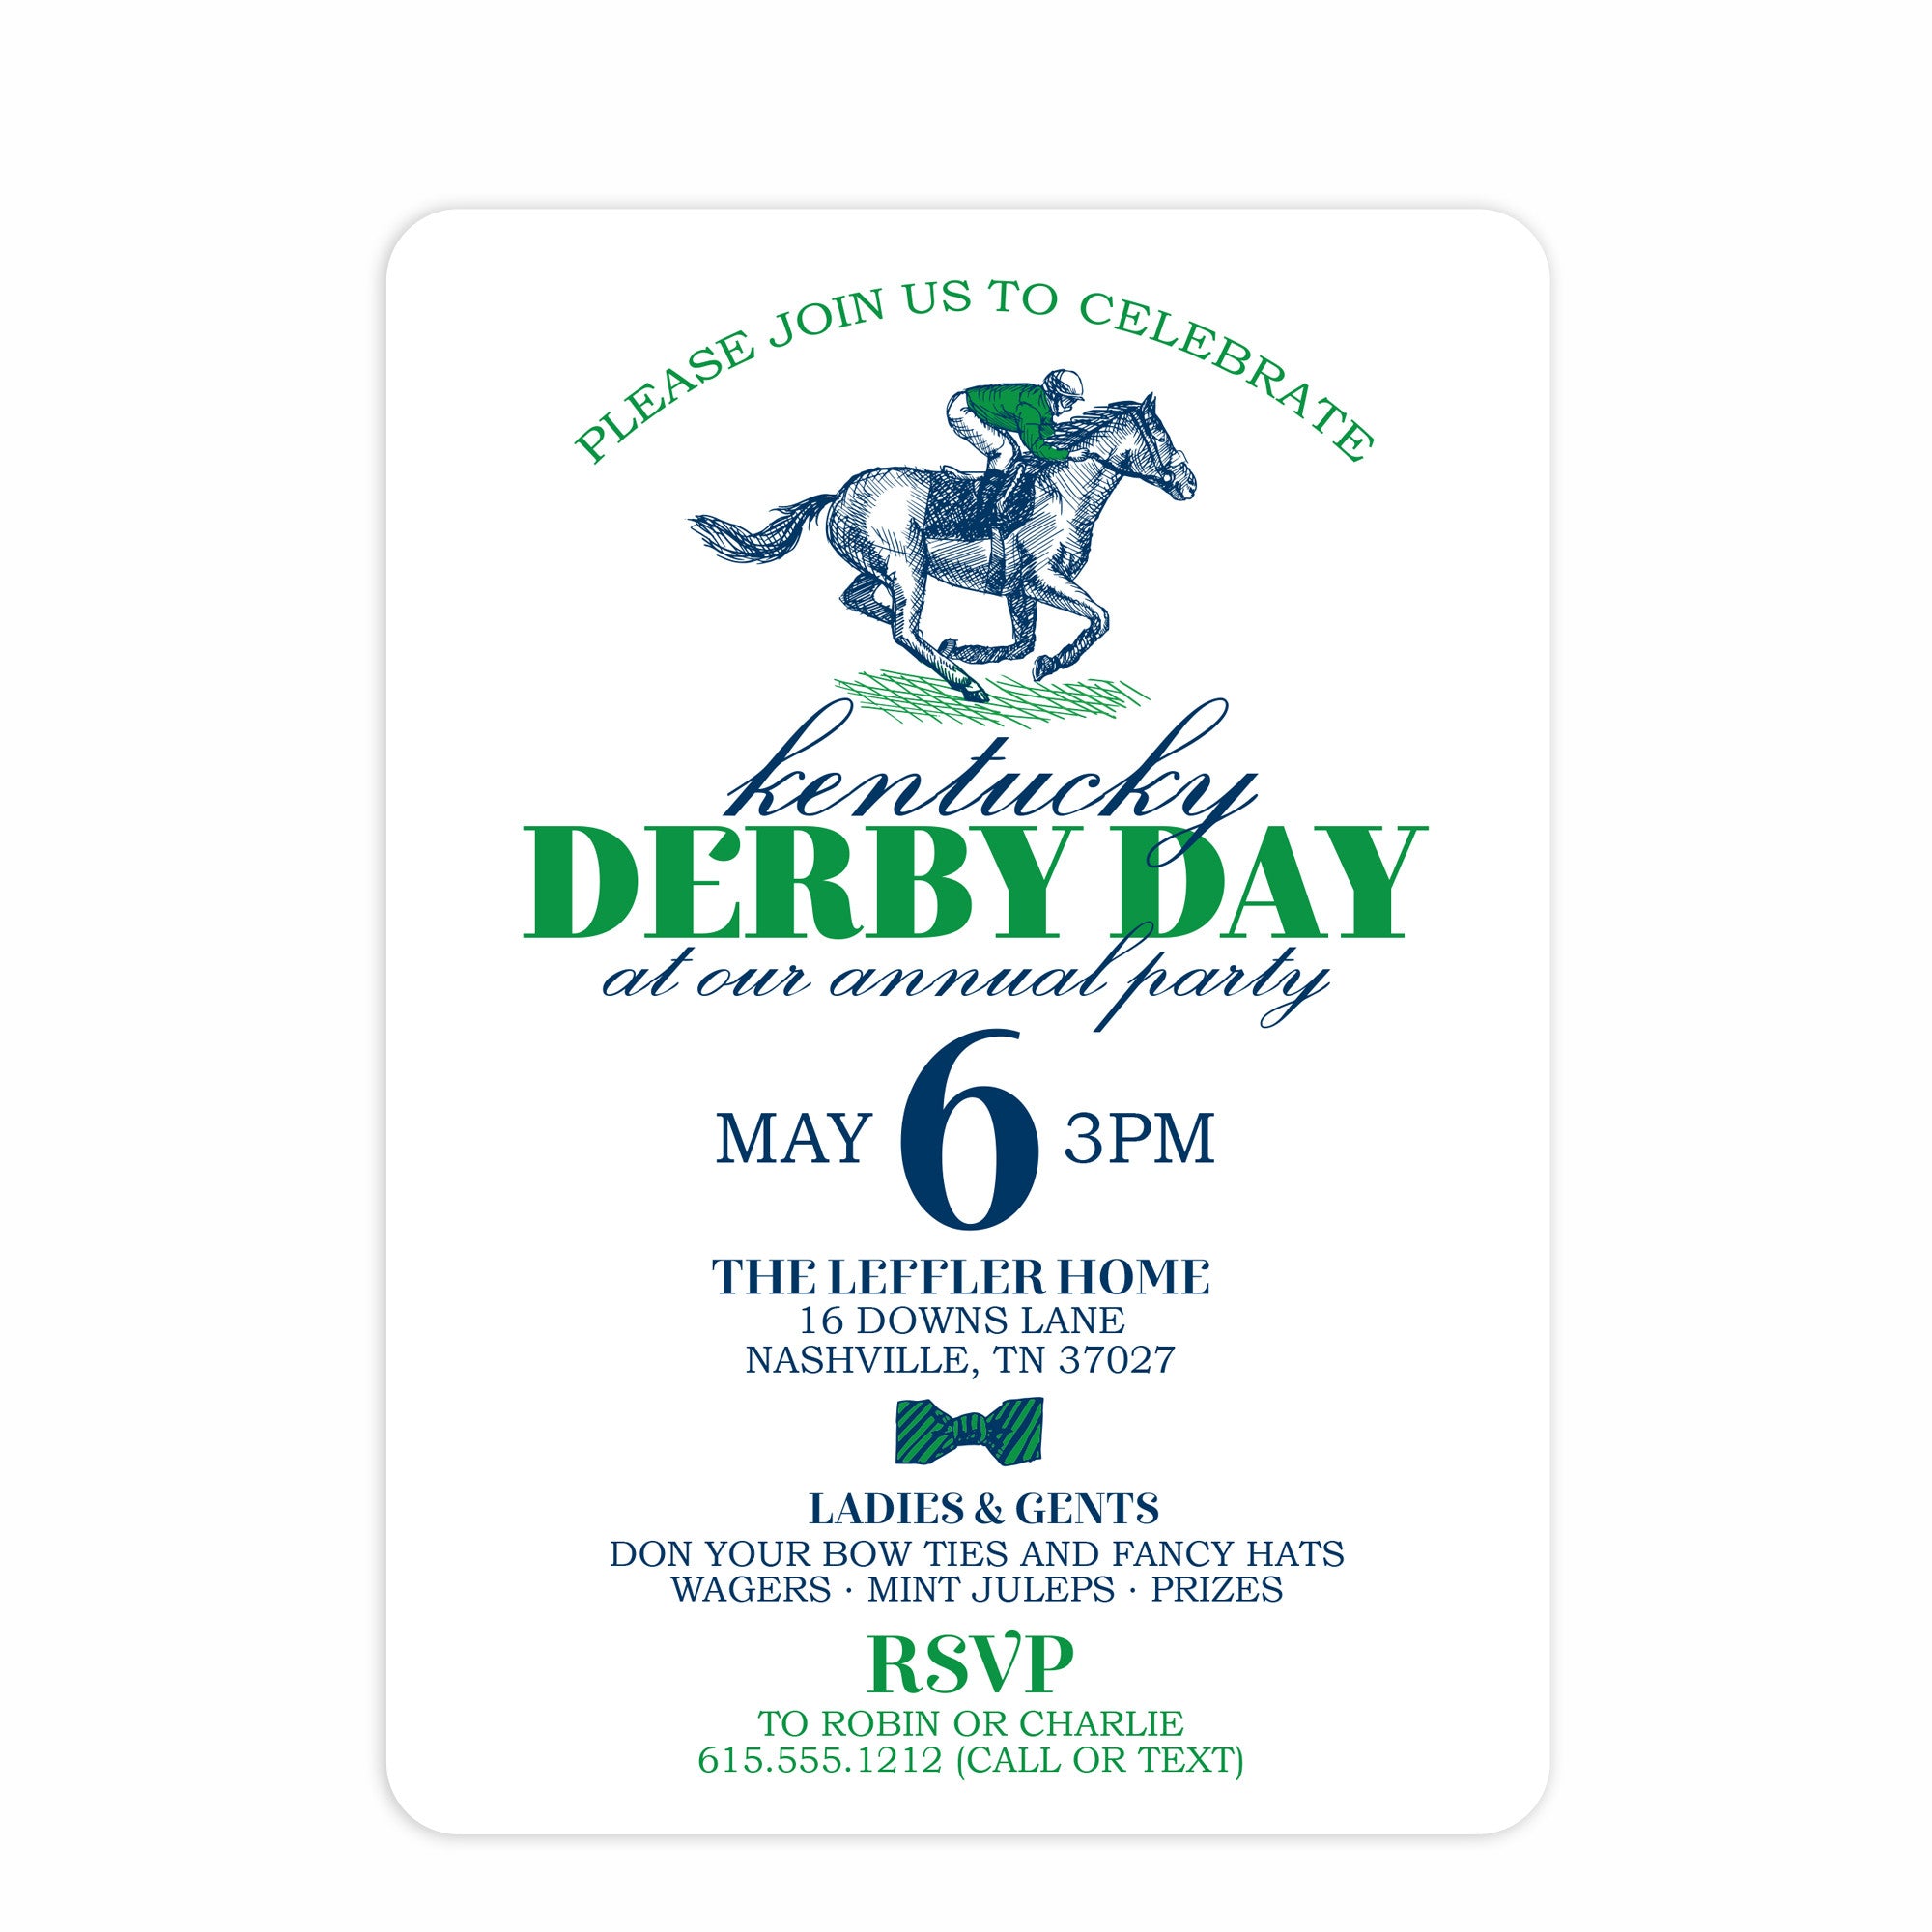 Kentucky Derby Day Invitation, Vintage Sketch with Diamond Pattern, Pipsy.com, front view